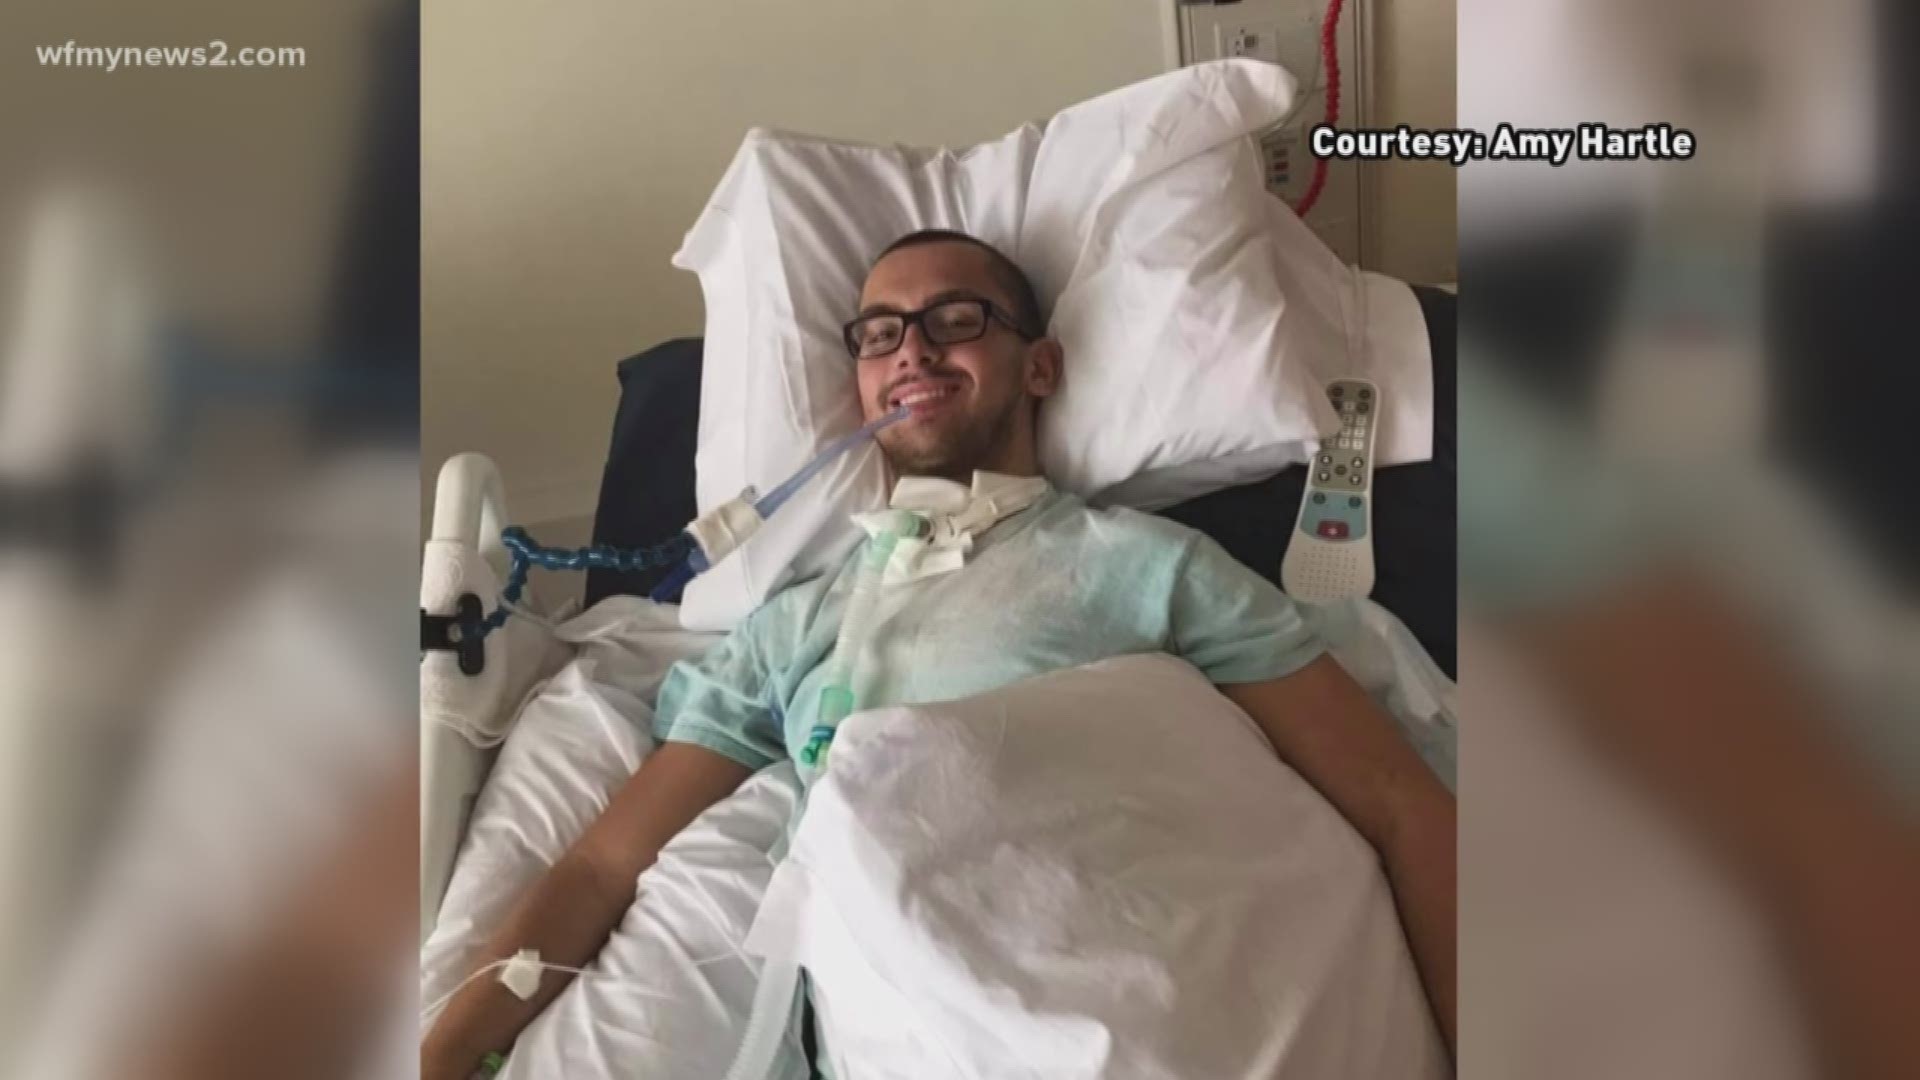 Andrew Hartle lost movement from his waist down after diving into the ocean. Now he’s rehabbing, working on his strength, and leaning on his family for support.